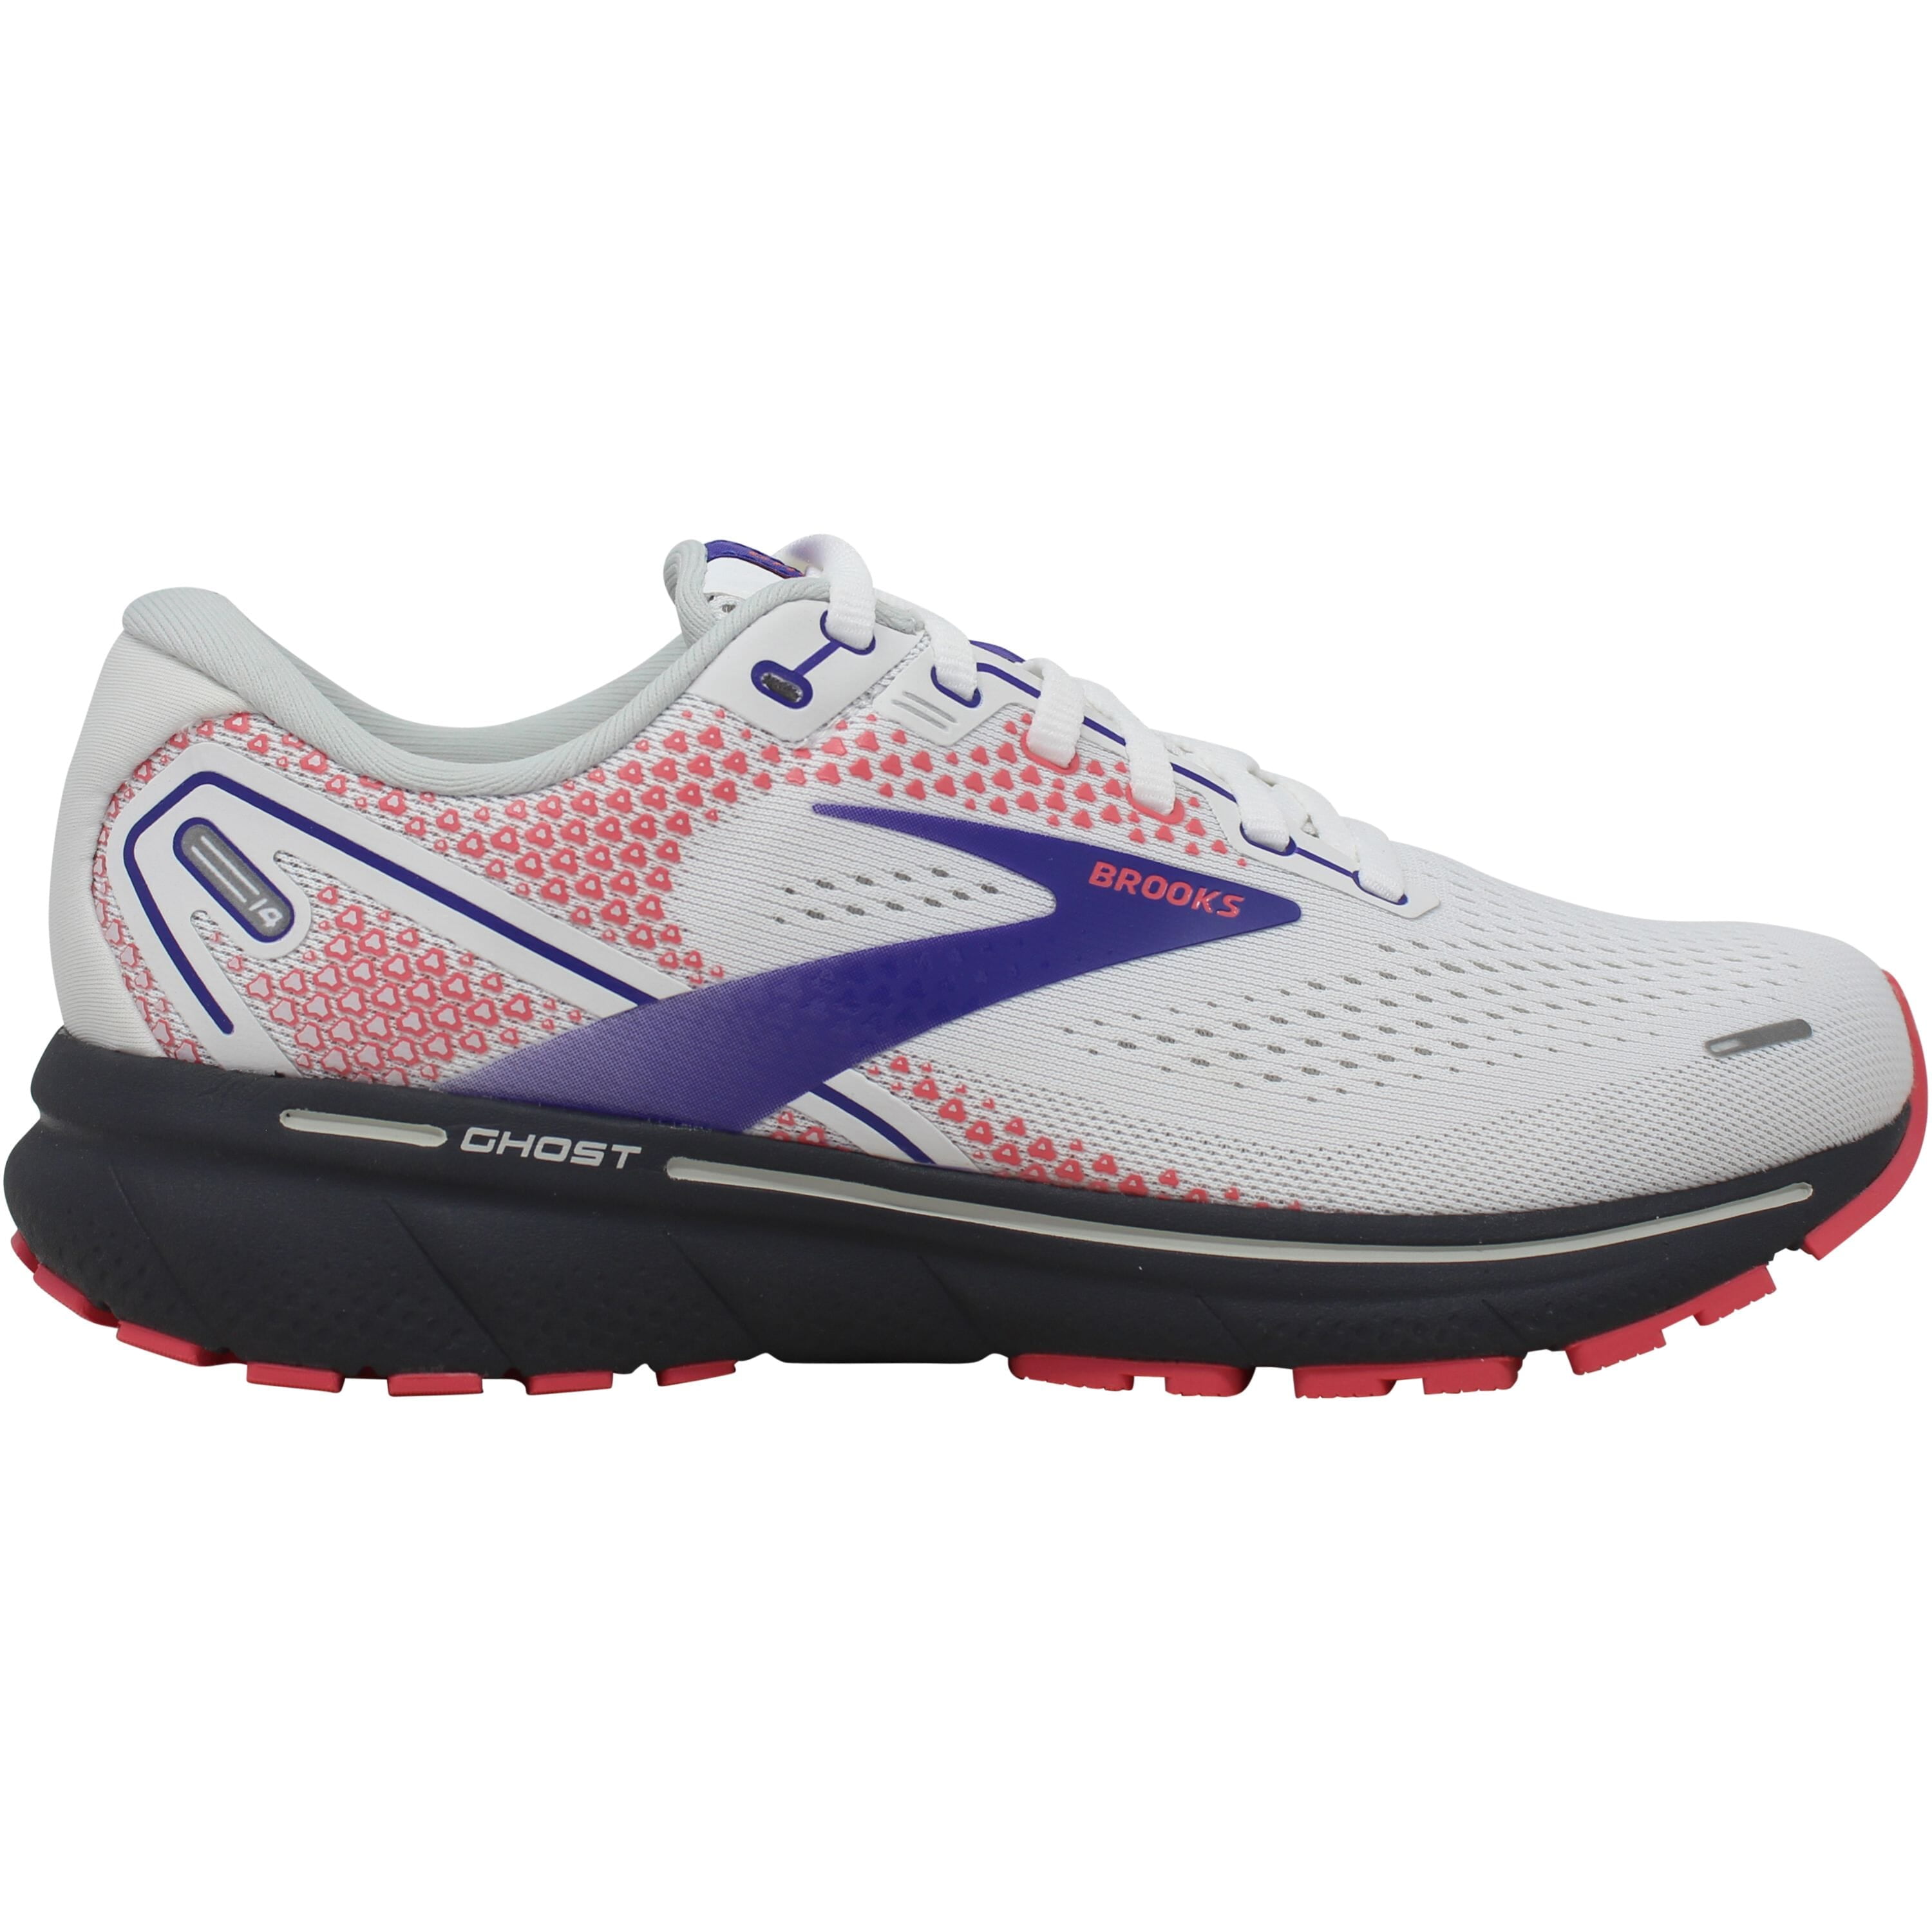 Brooks Ghost 14, Womens Running Shoes